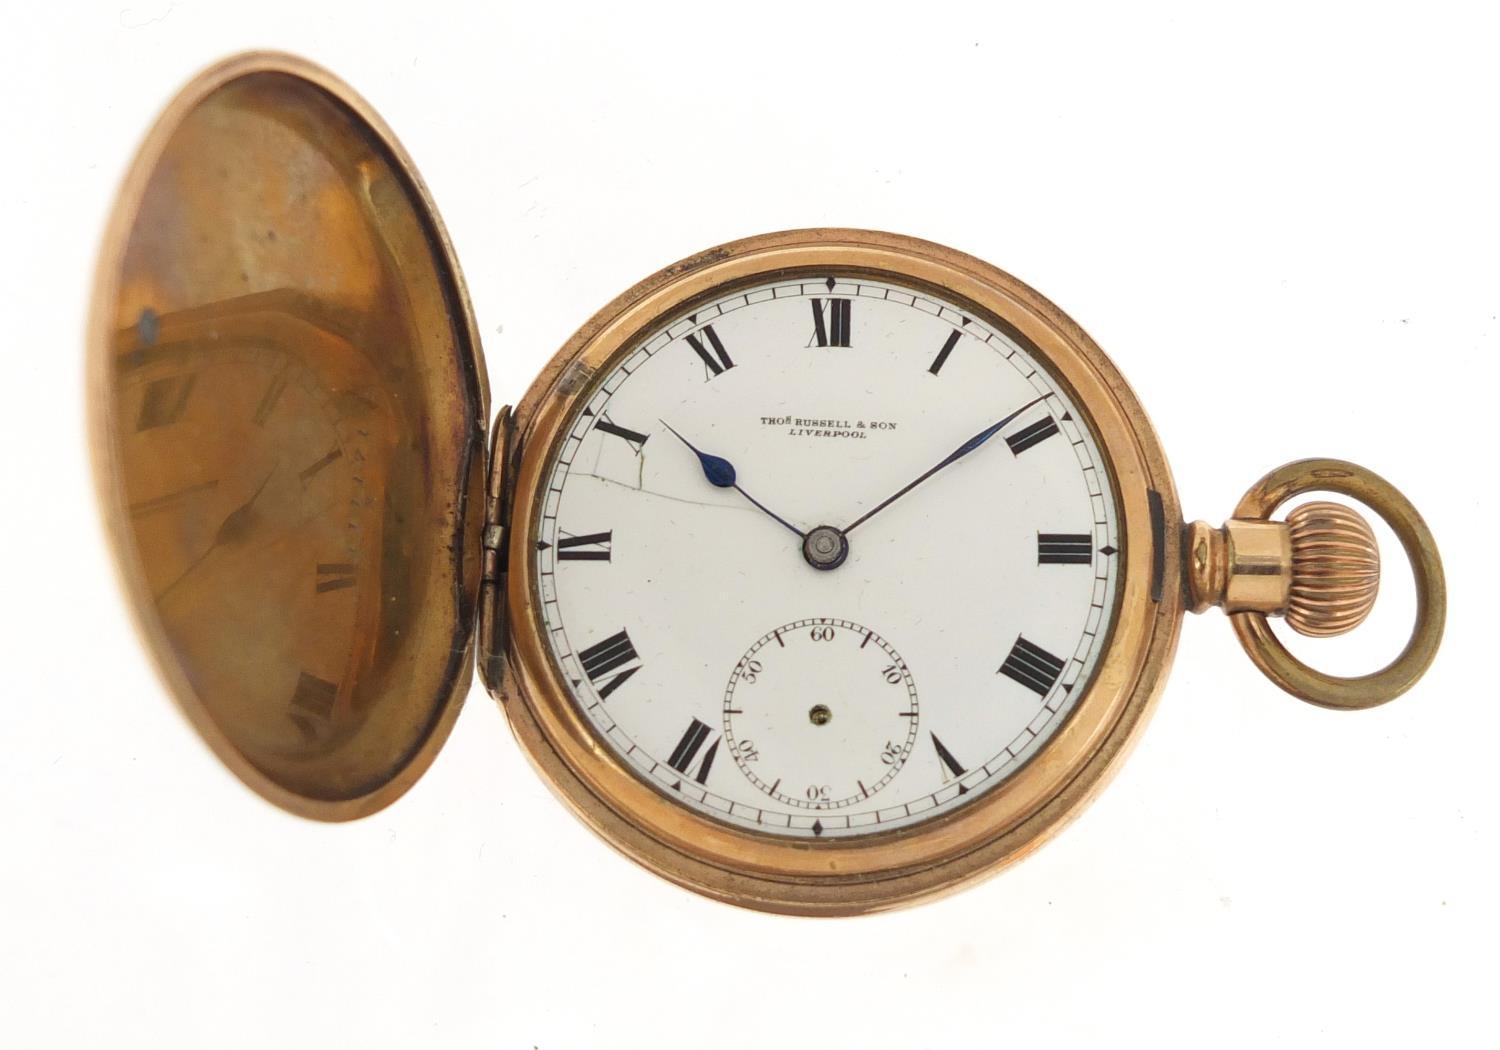 Thomas Russell & Son, gentlemen's gold plated full hunter pocket watch with enamel dial, the